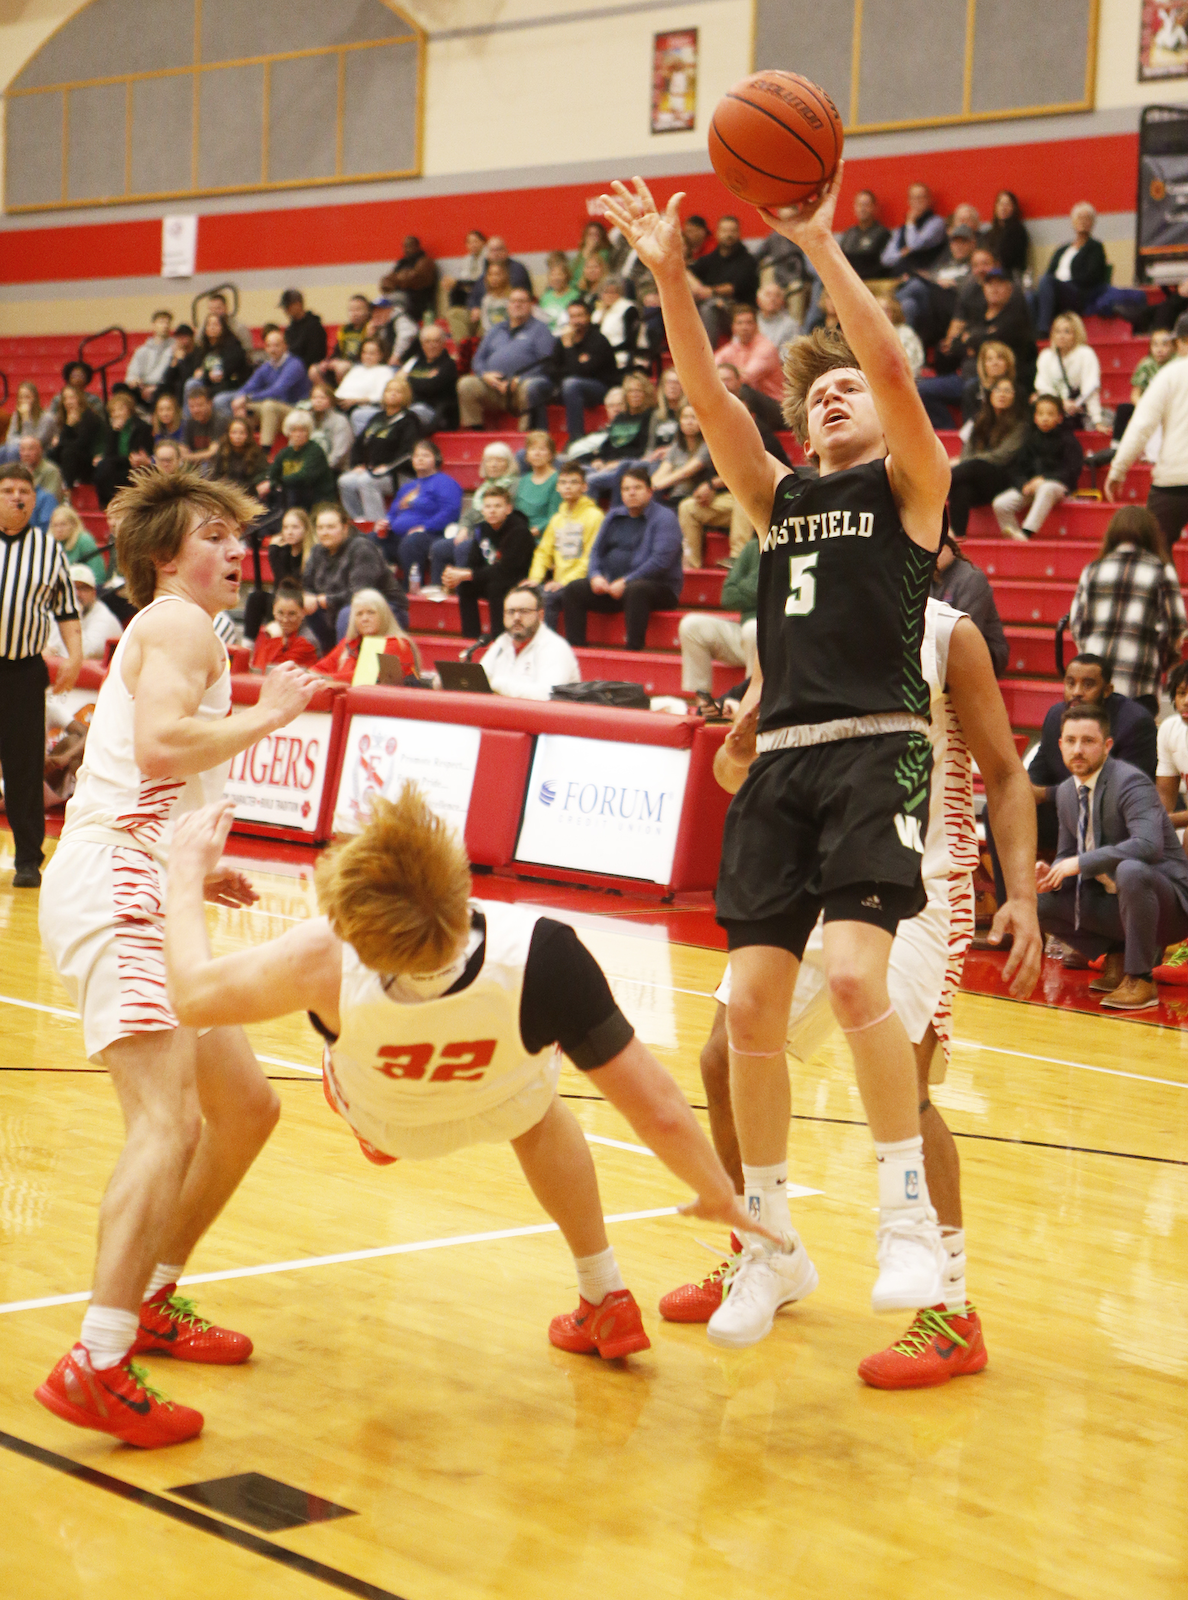 JV Boys Basketball @ Fishers gallery cover photo